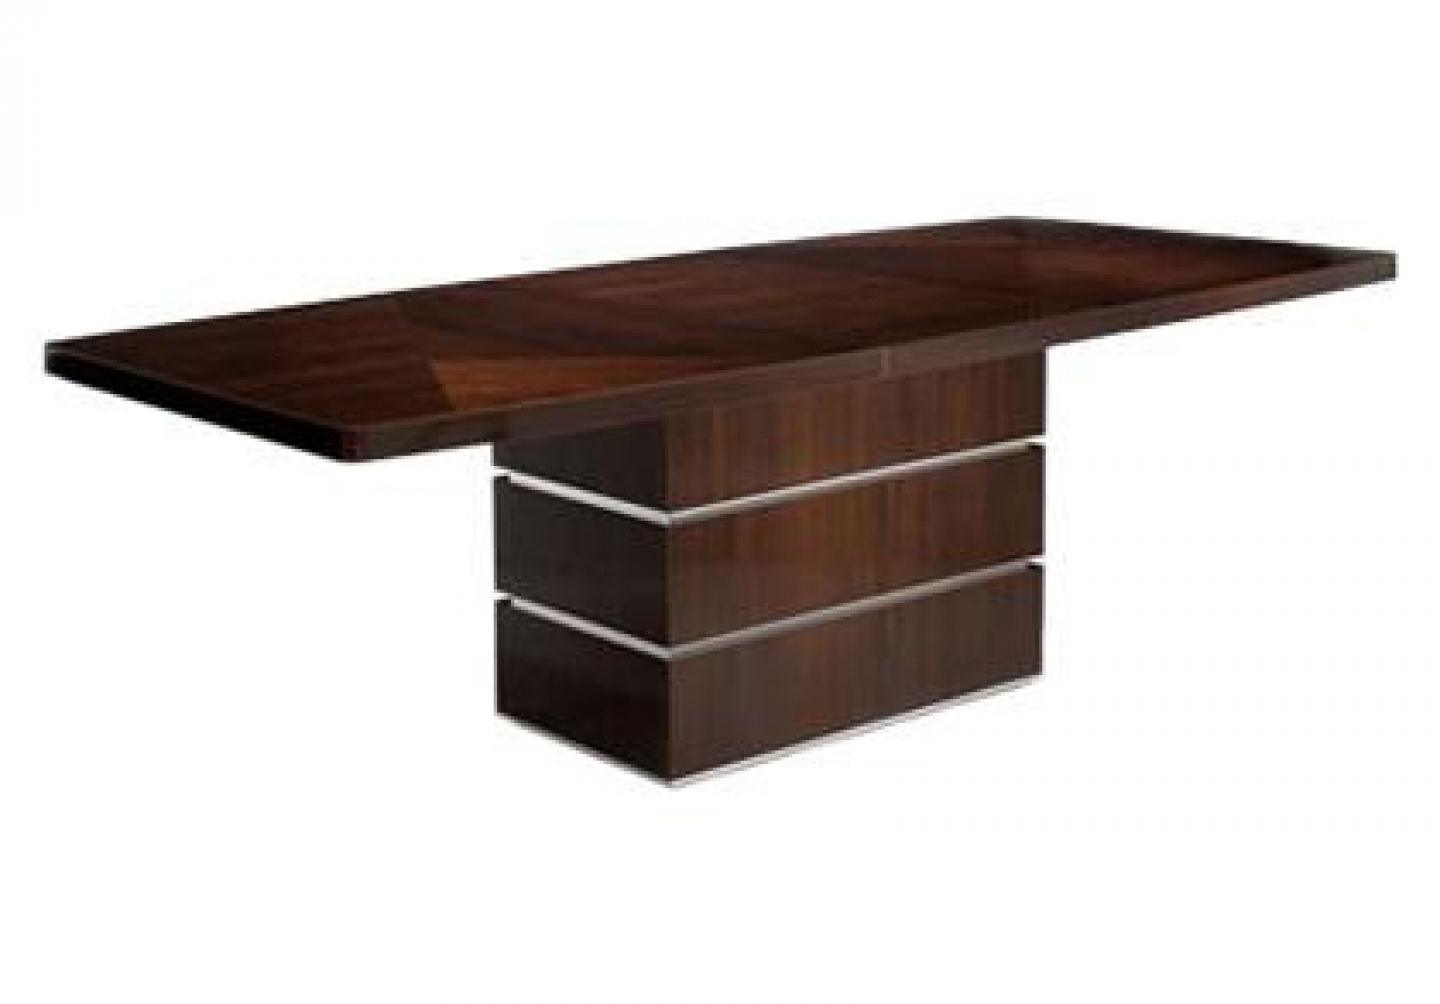 wood table designs photo - 9